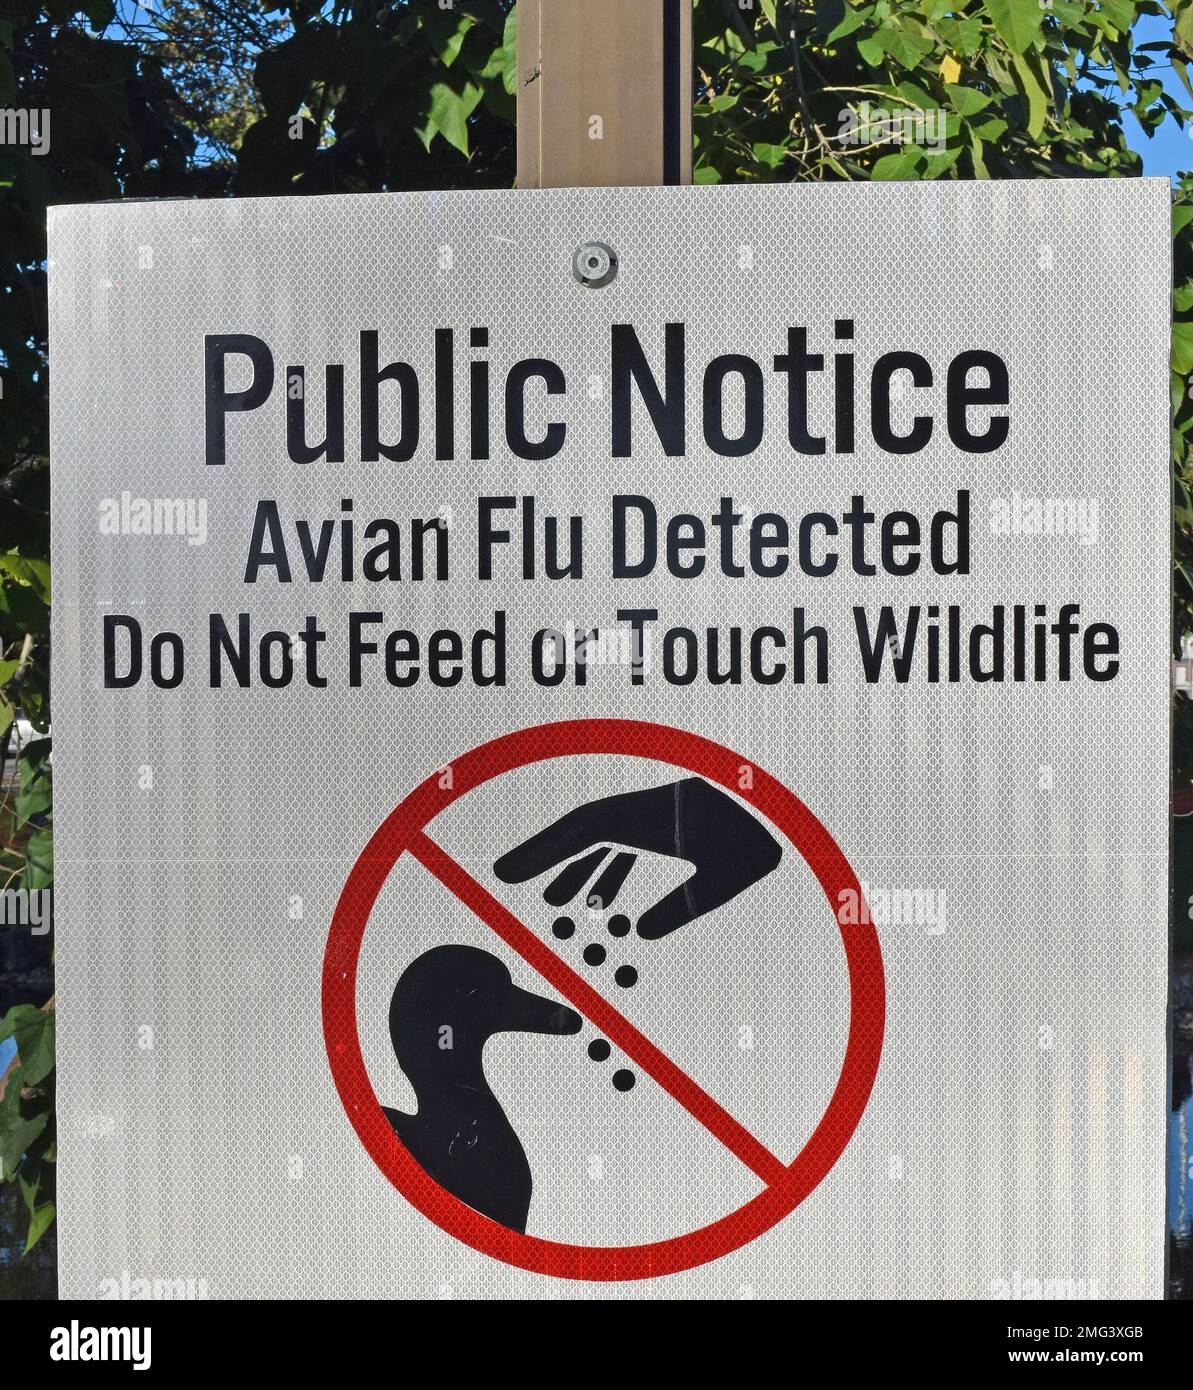 Avian flu detected, please do not feed or touch wildlife, public notice sign at a Union City Civic Center park pond, California Stock Photo